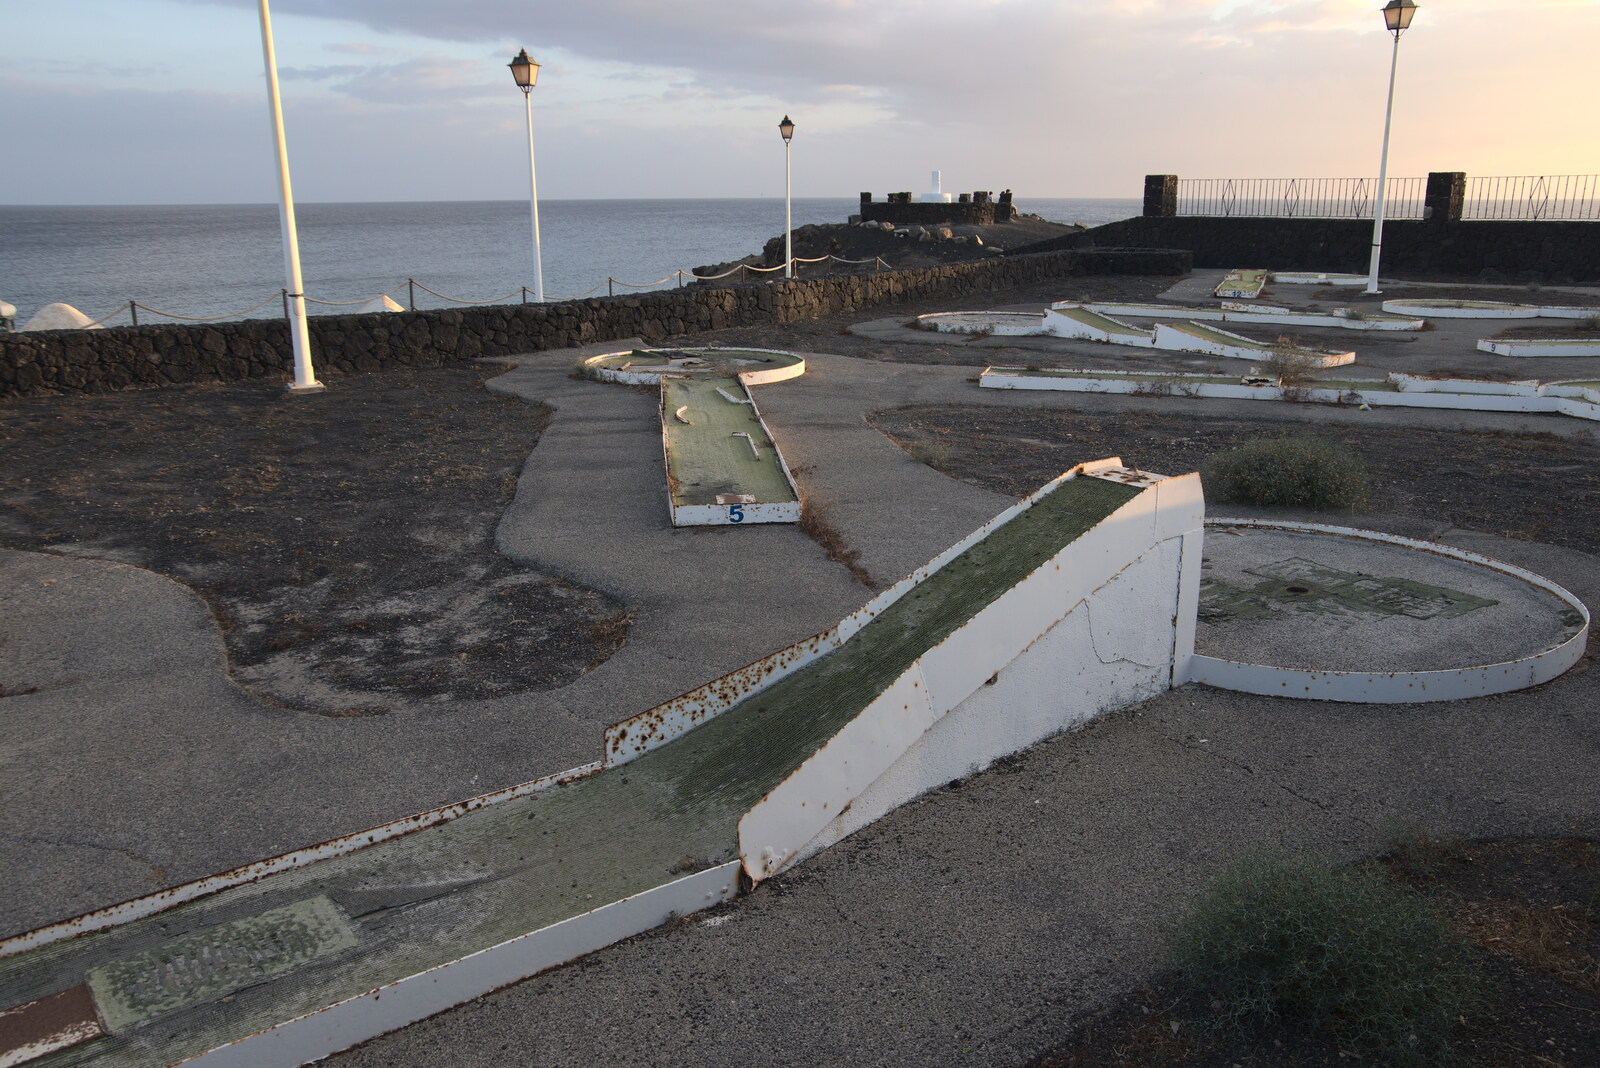 There's a derelict crazy golf course on the way from Five Days in Lanzarote, Canary Islands, Spain - 24th October 2021